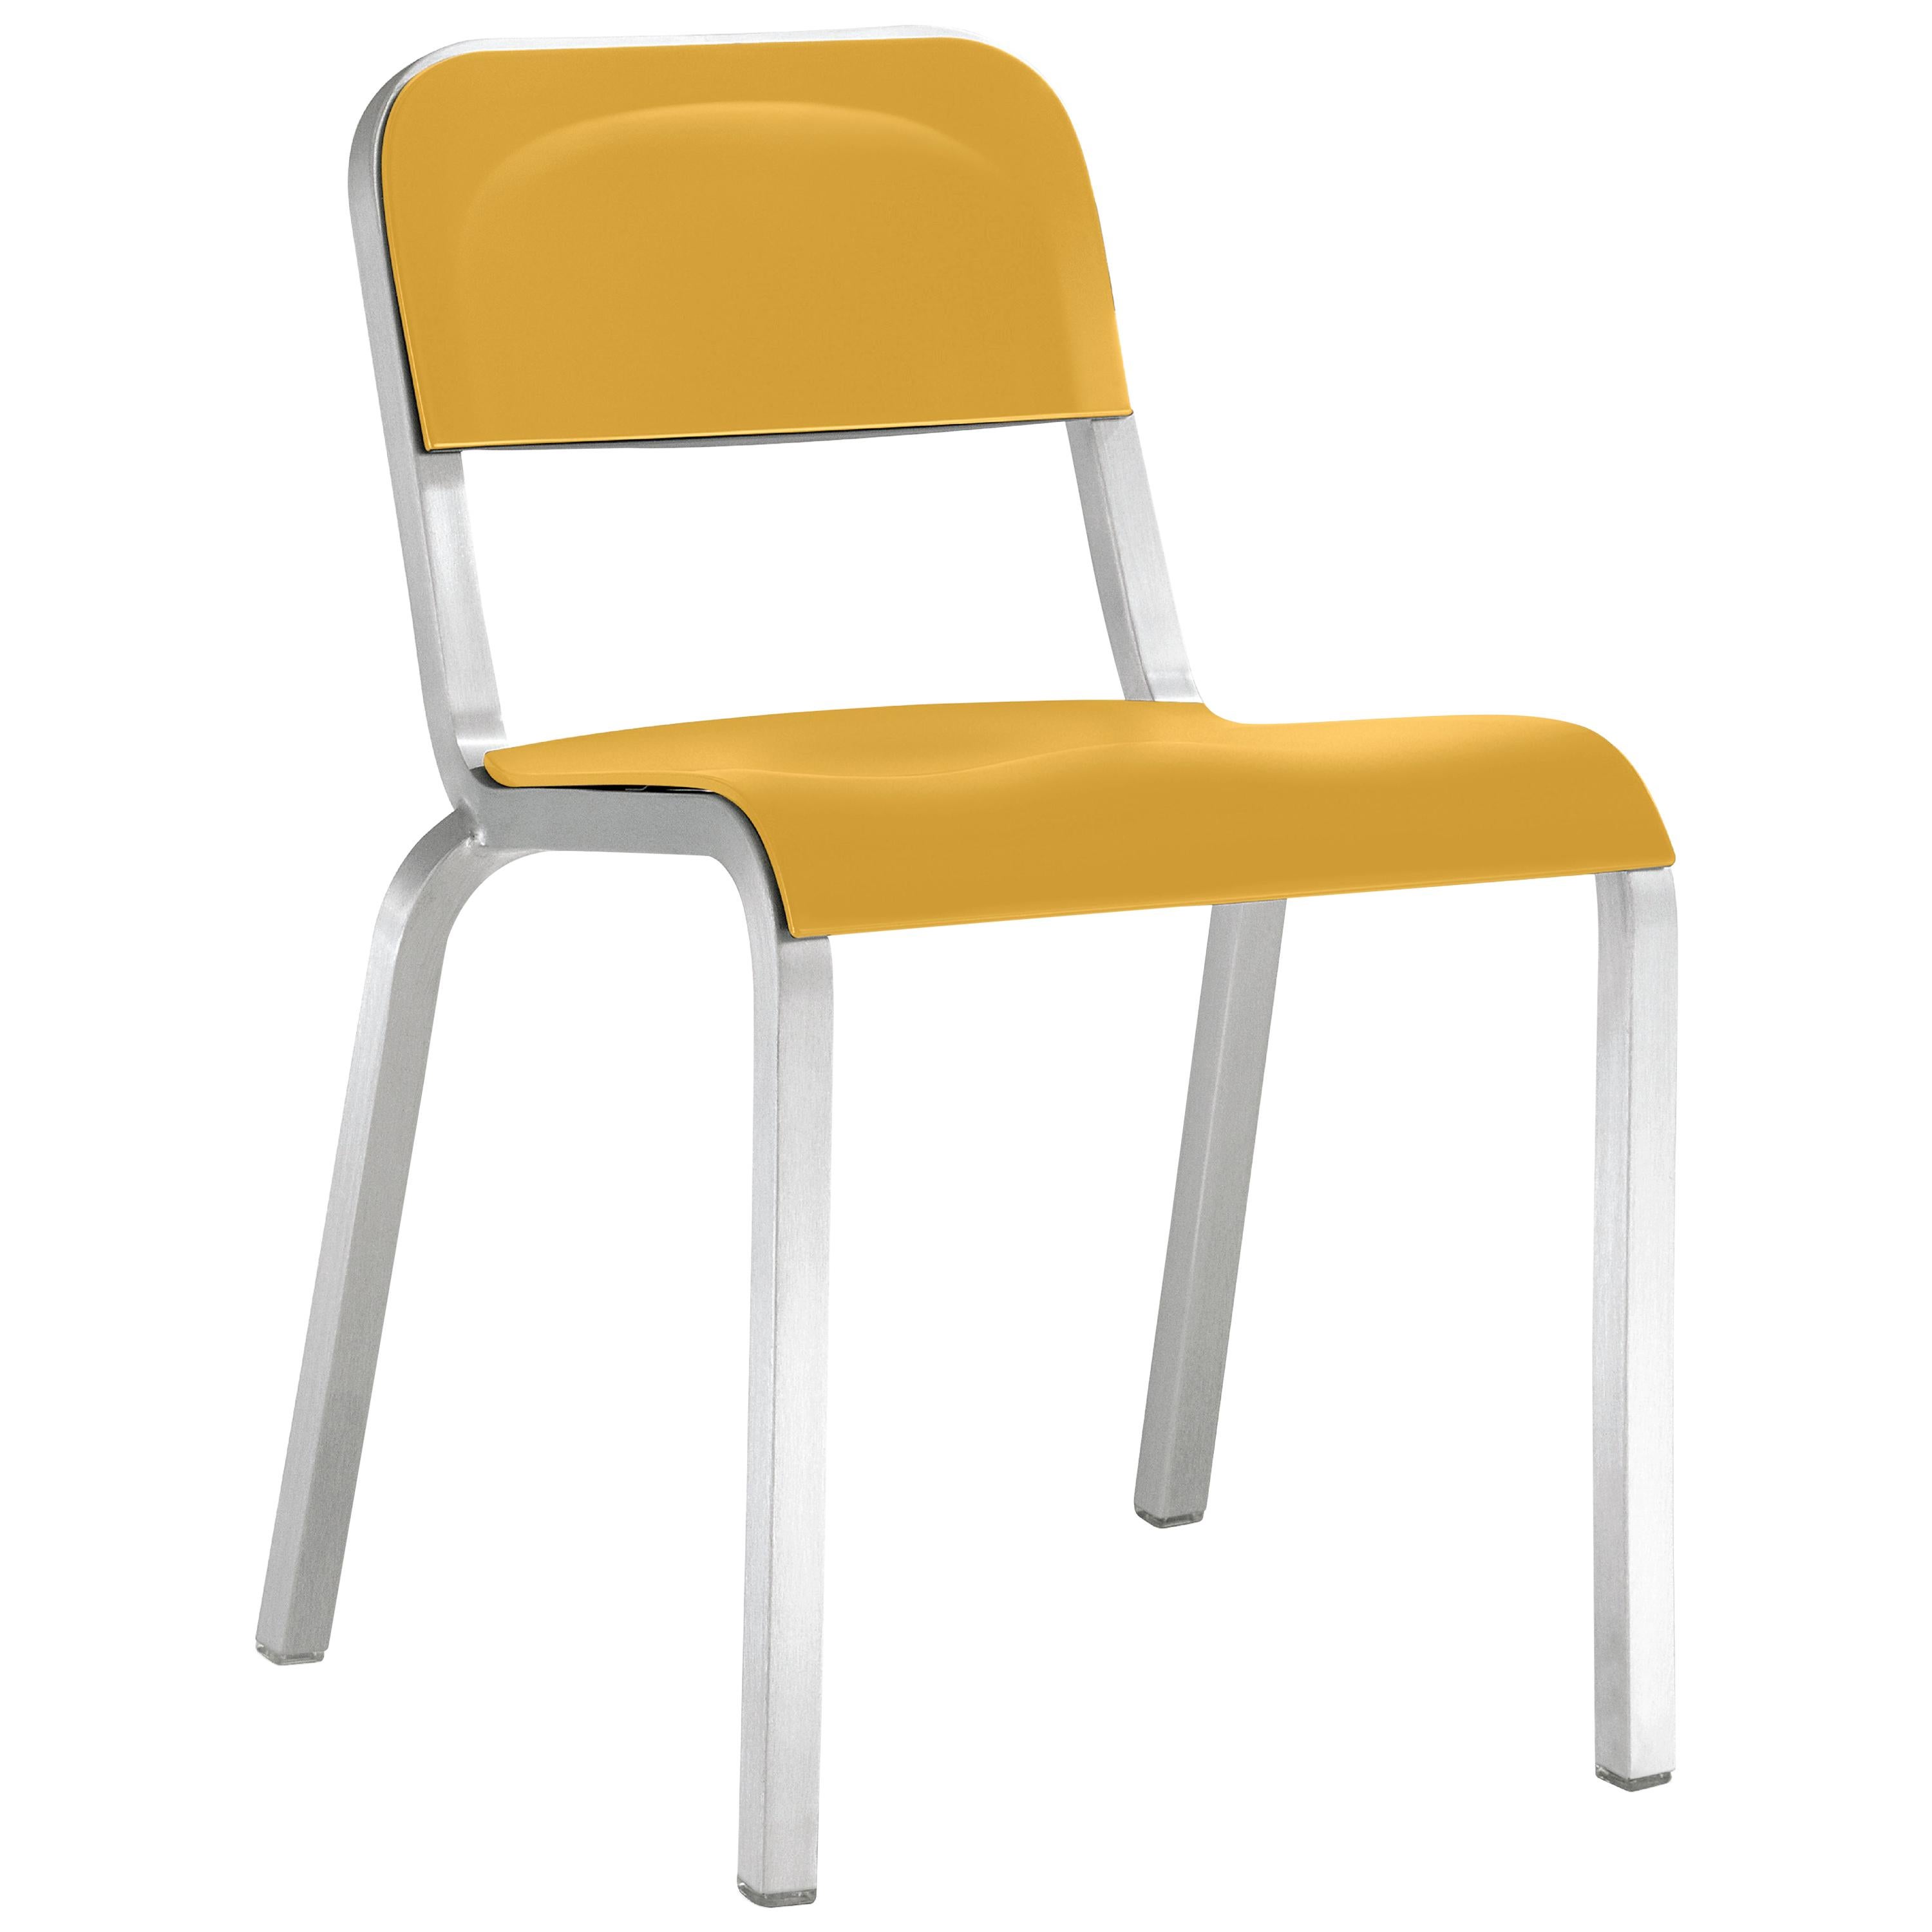 Emeco 1951 Aluminum Stacking Chair with Yellow Seat by Adrian Van Hooydonk For Sale